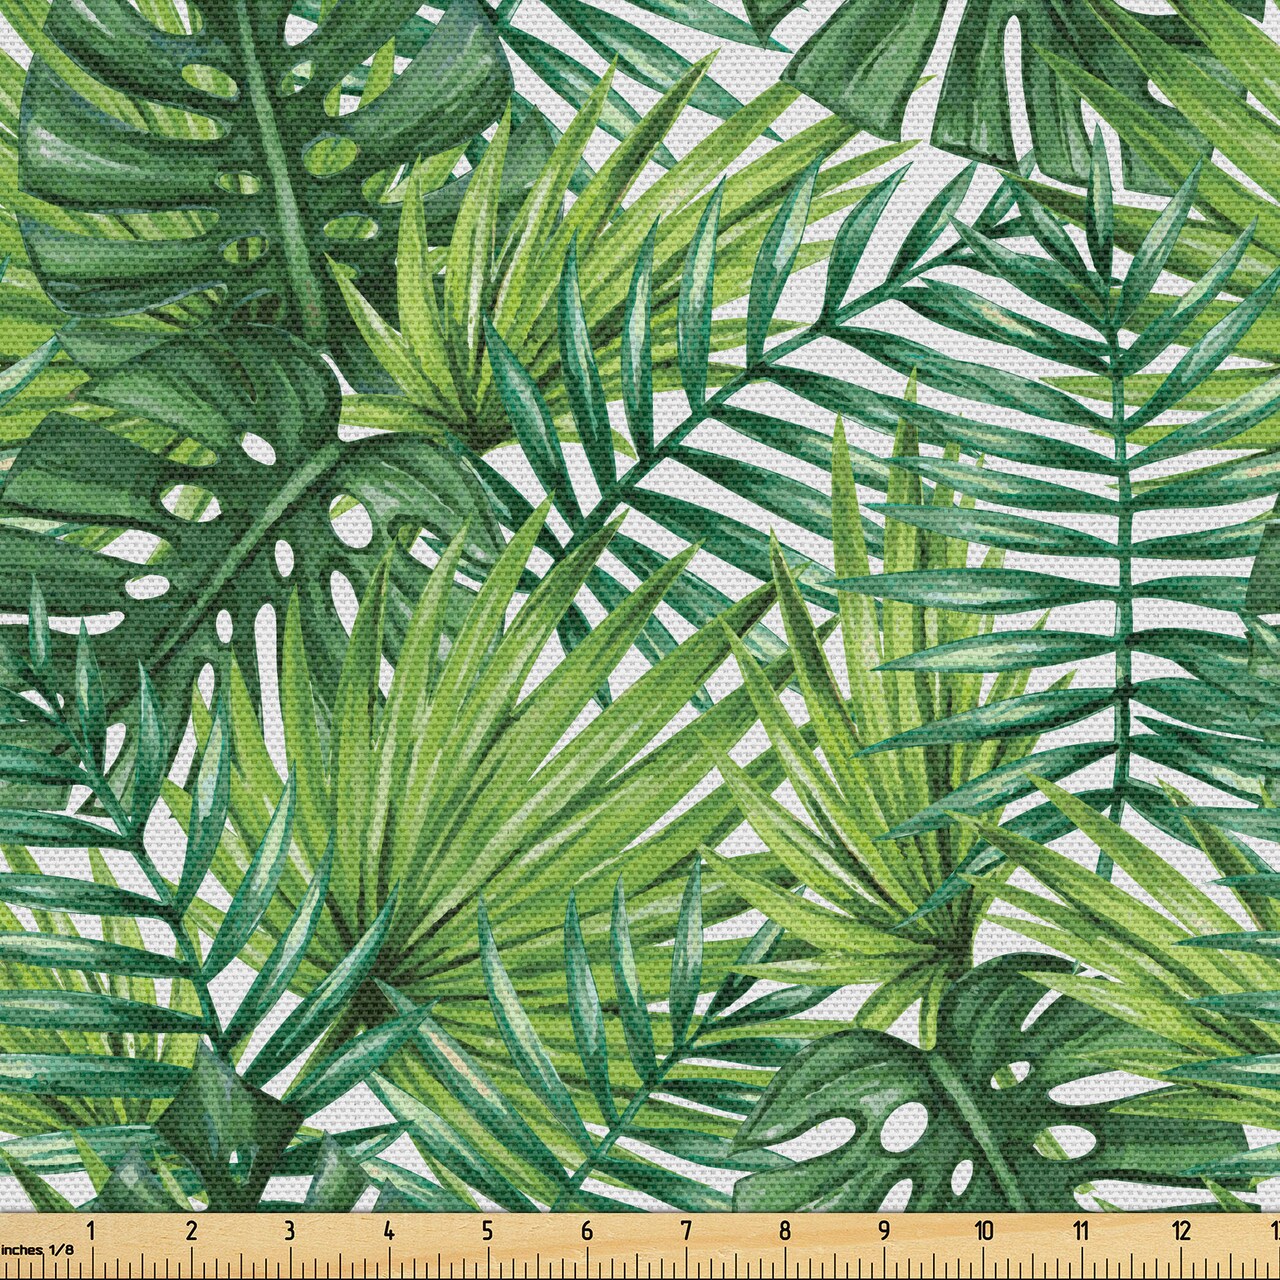 Ambesonne Leaf Fabric by the Yard, Tropical Exotic Banana Forest Palm Tree Leaves Watercolor Design Image, Decorative Fabric for Upholstery and Home Accents, Pale Green Dark Green